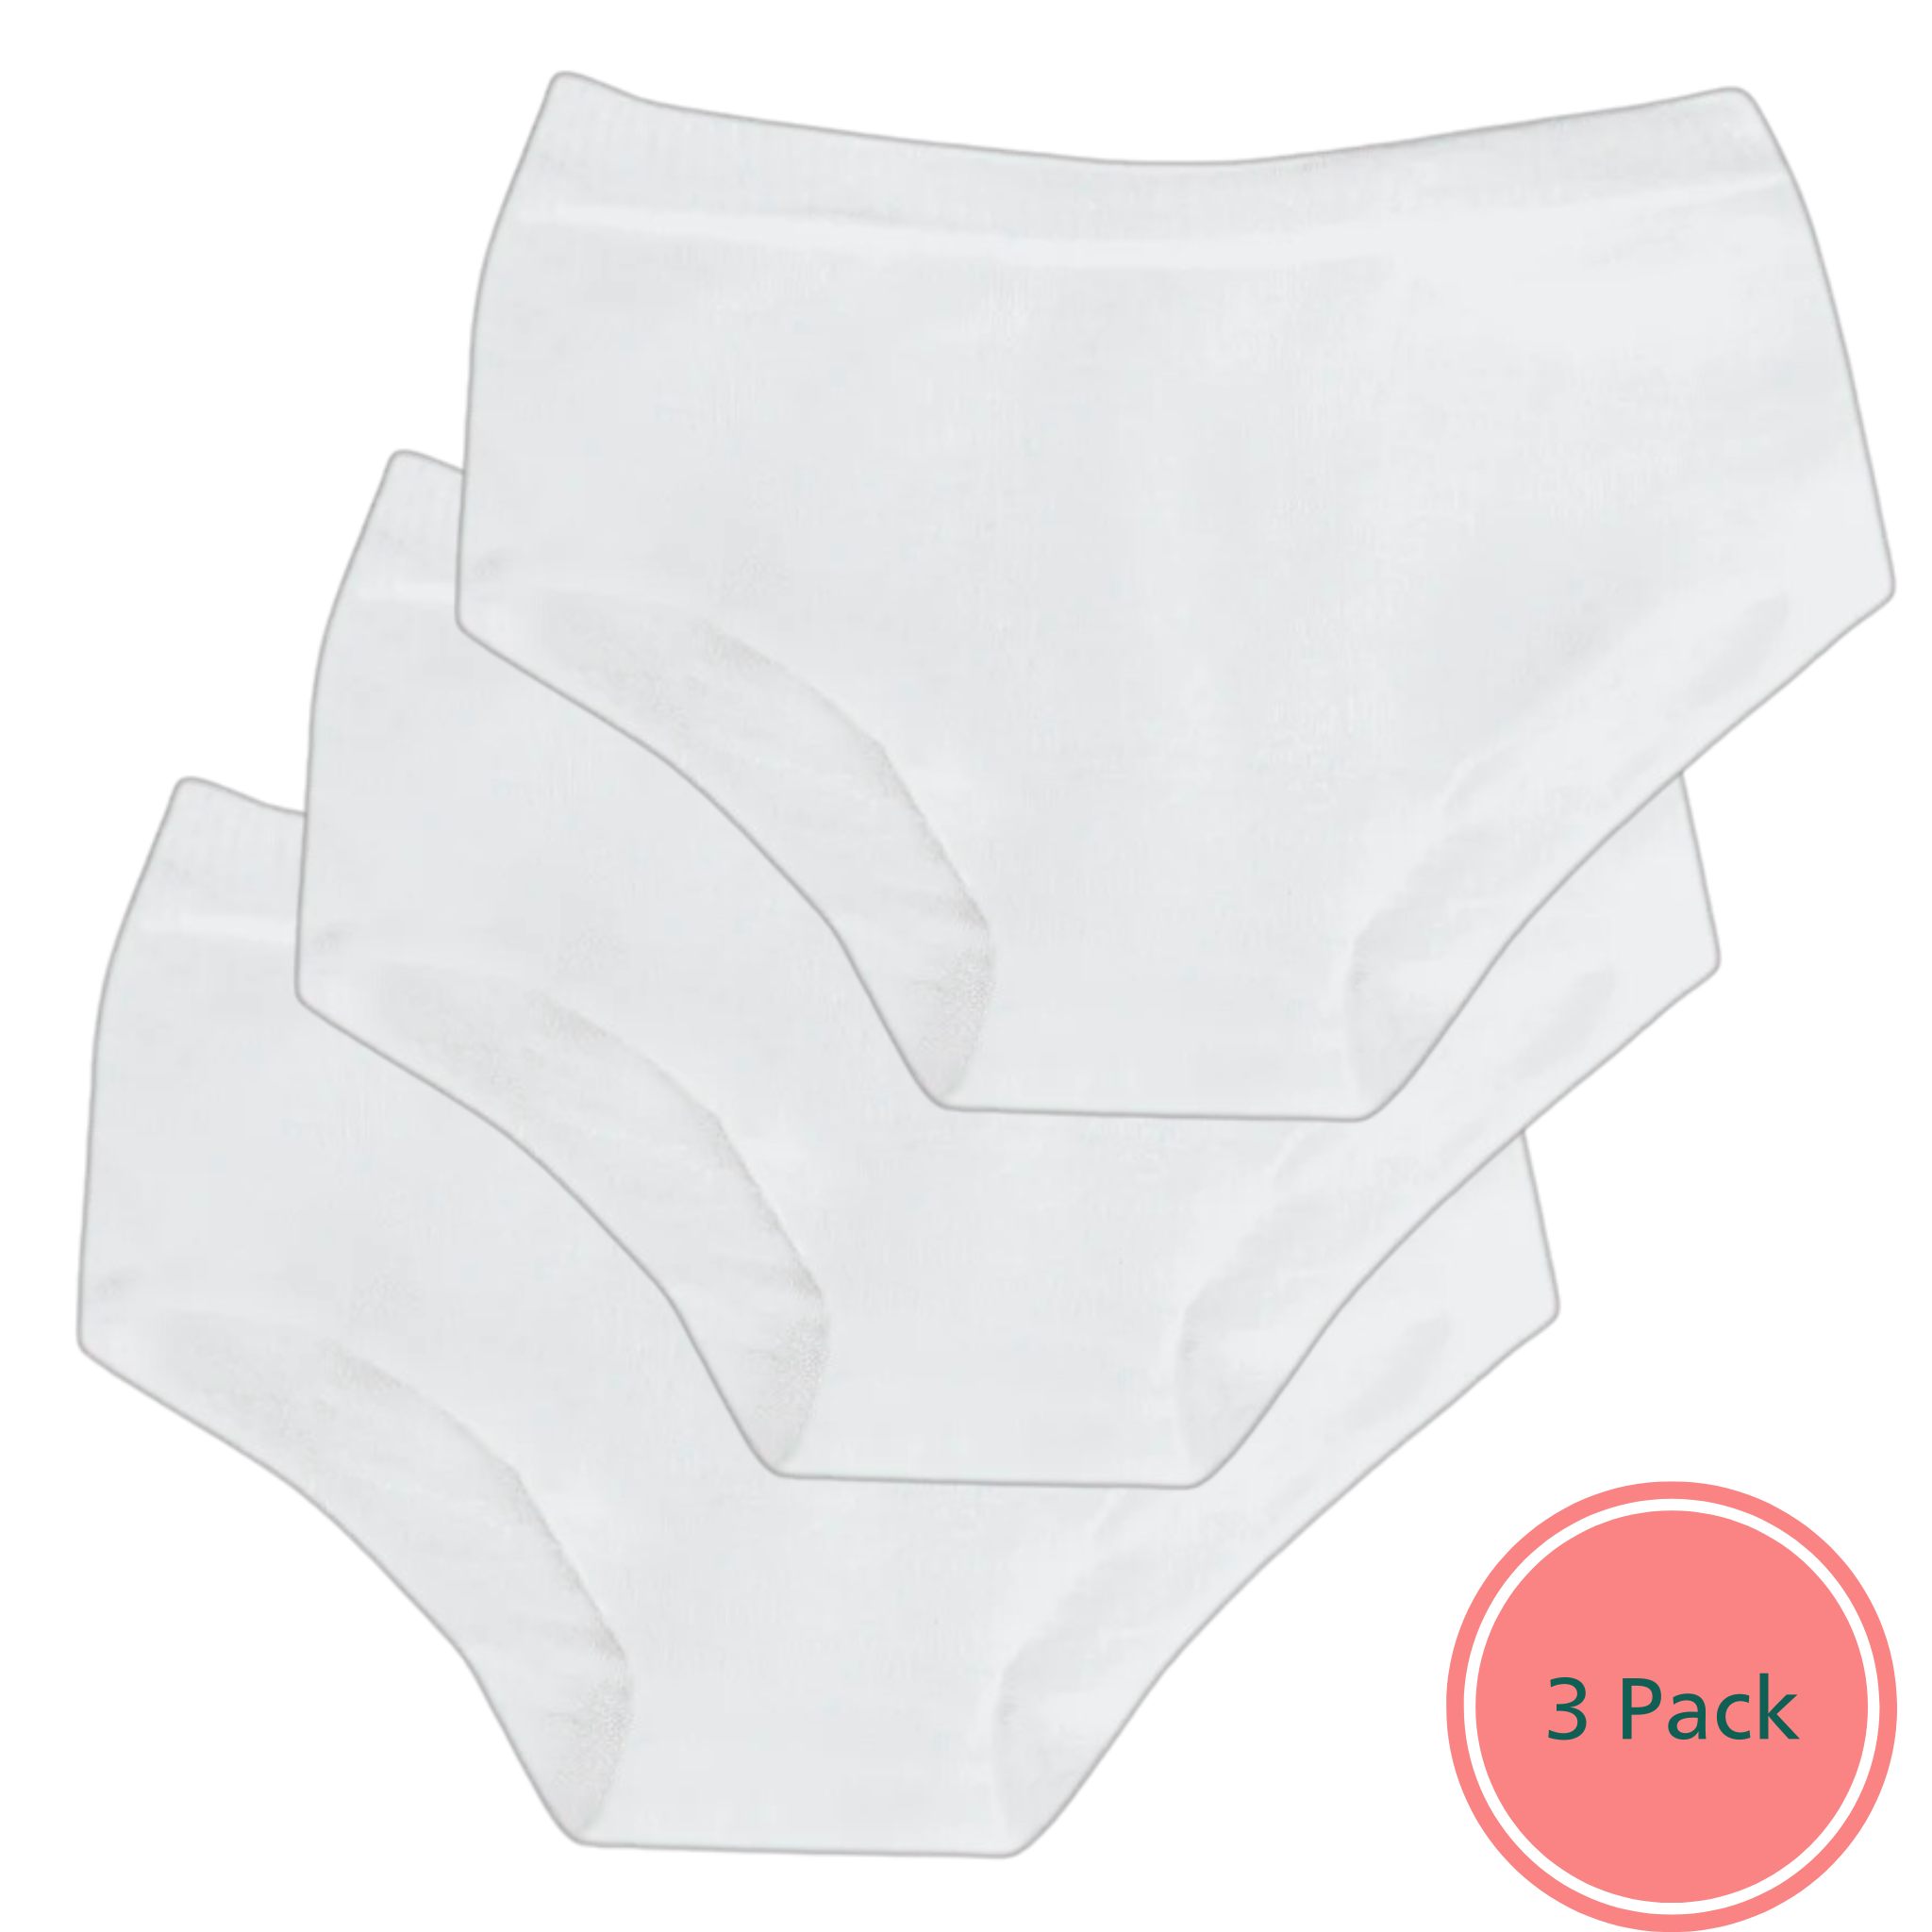 SmartKnitKIDS - Seamless Undies for Girls - 3pack: White Brief Pants